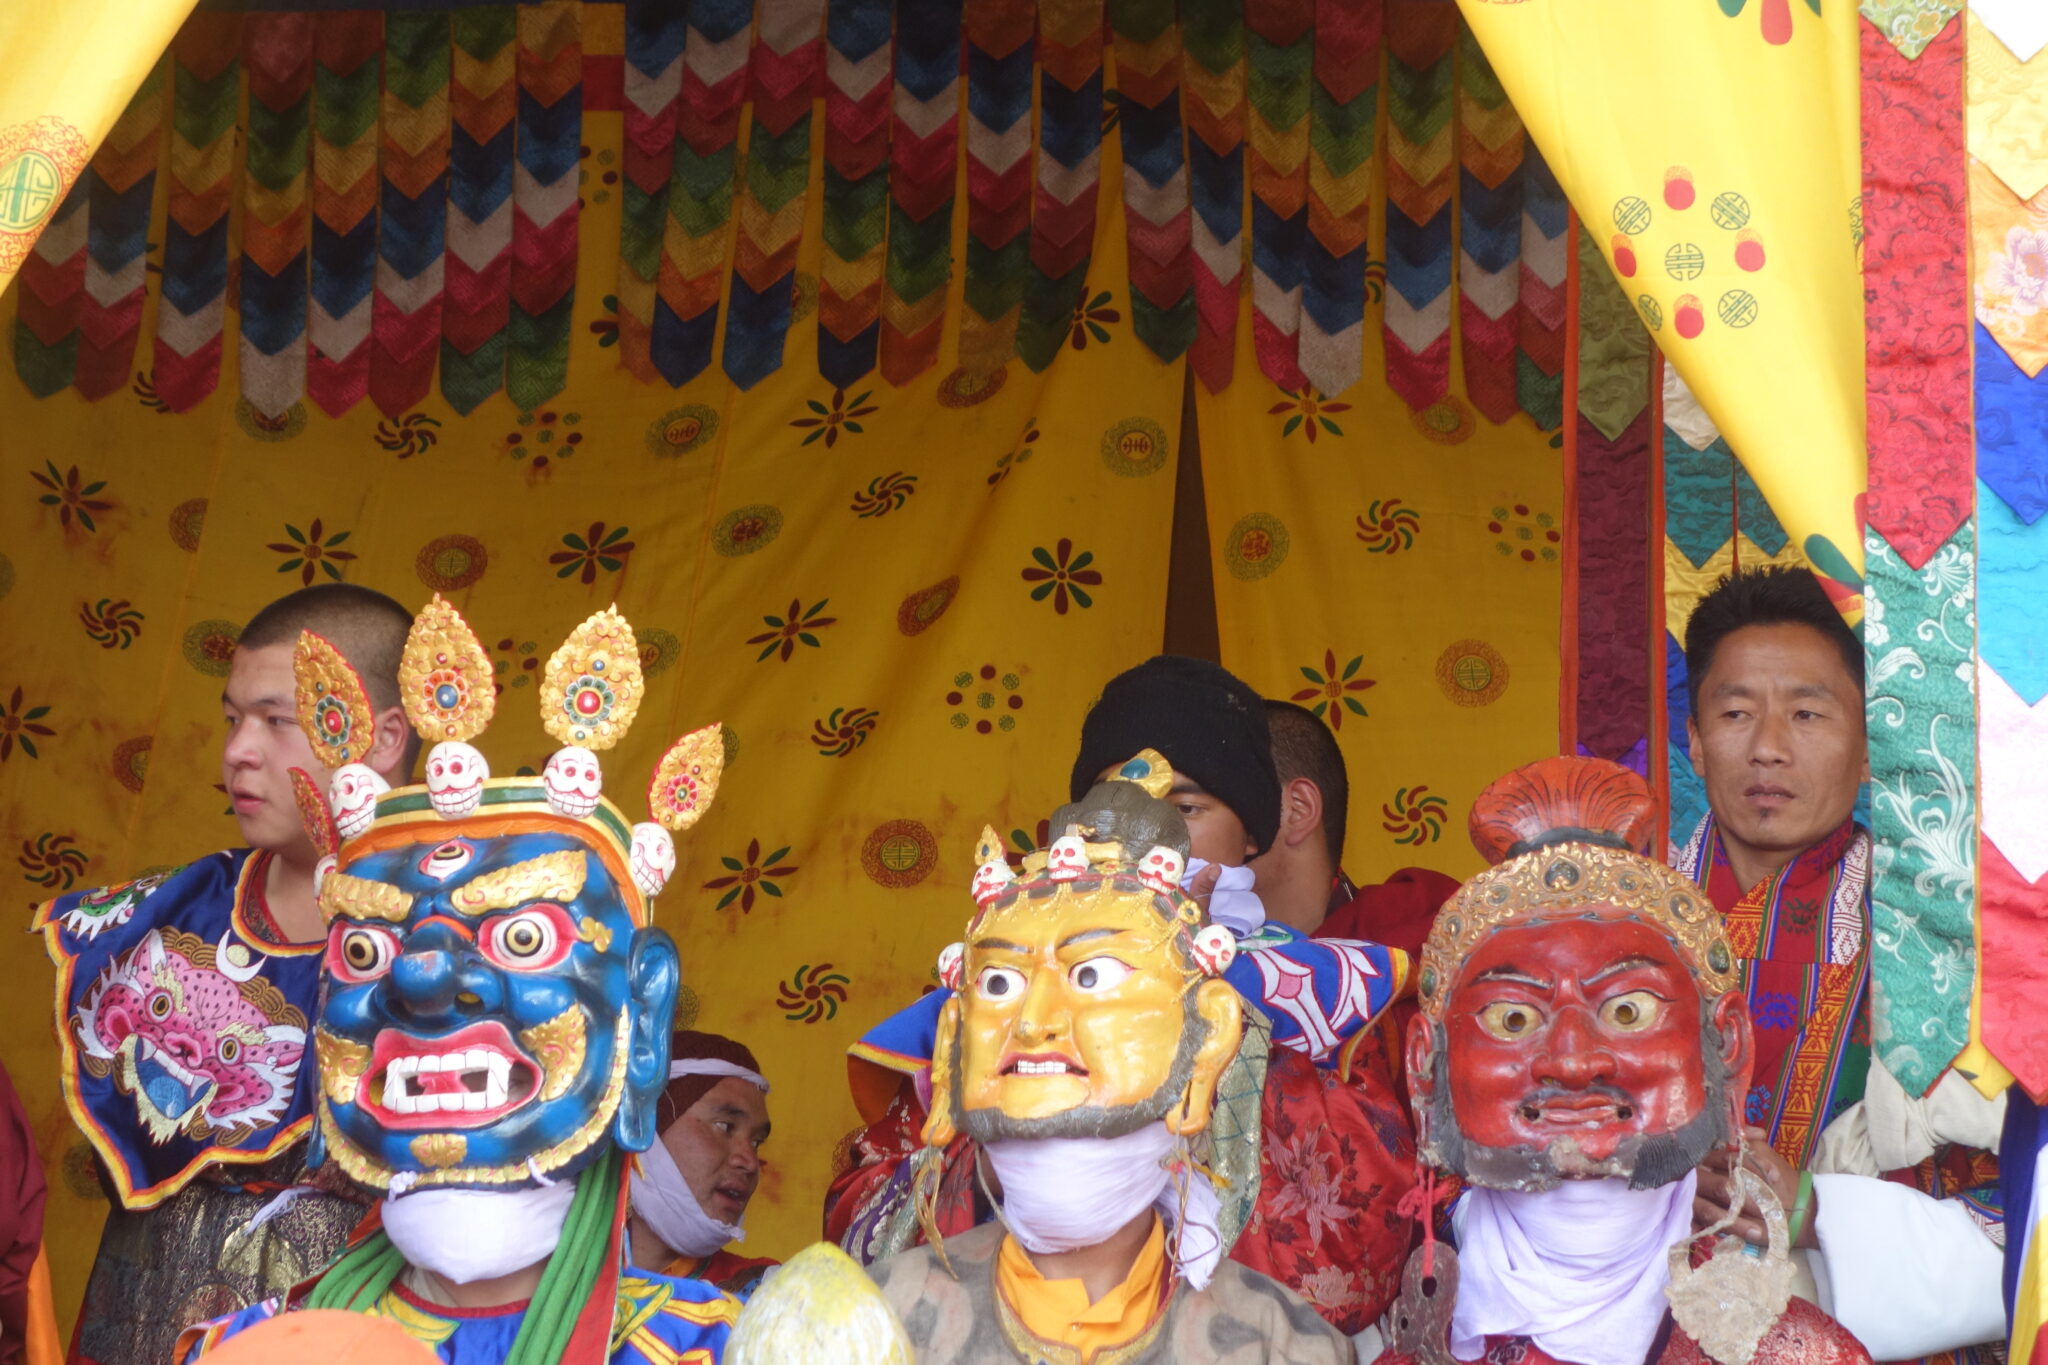 Three performers wearing masks in blue, yellow, and red pictured before structure festooned with saffron textile and banners